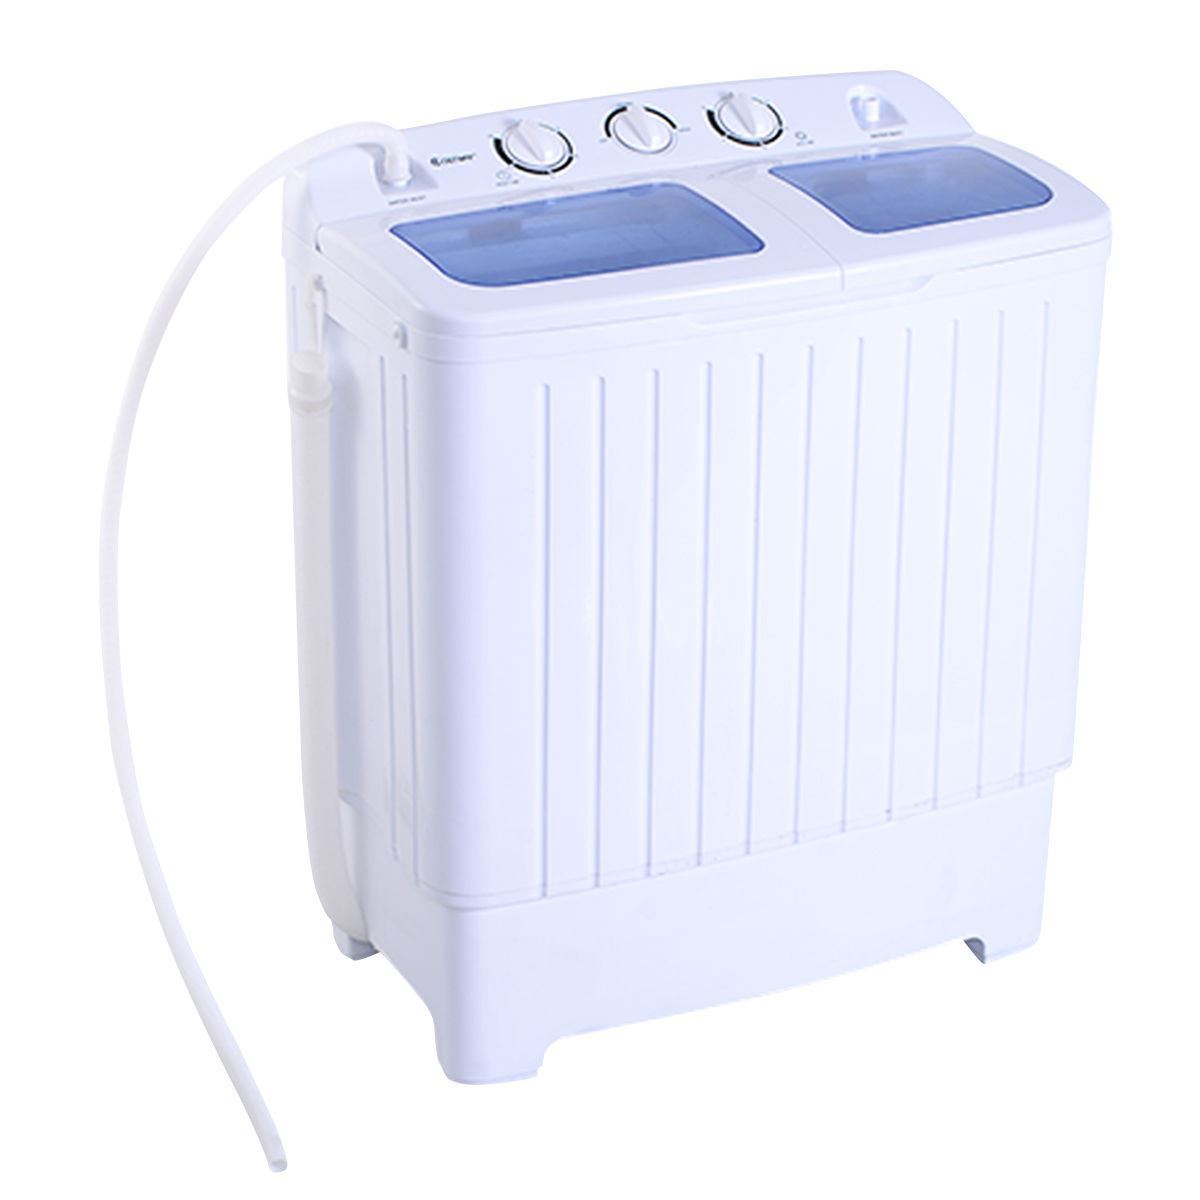 Online Gym Shop Cb16964 Portable Mini Compact Washer Machine Washer Spin Dryer Twin Tub - 11 Lbs